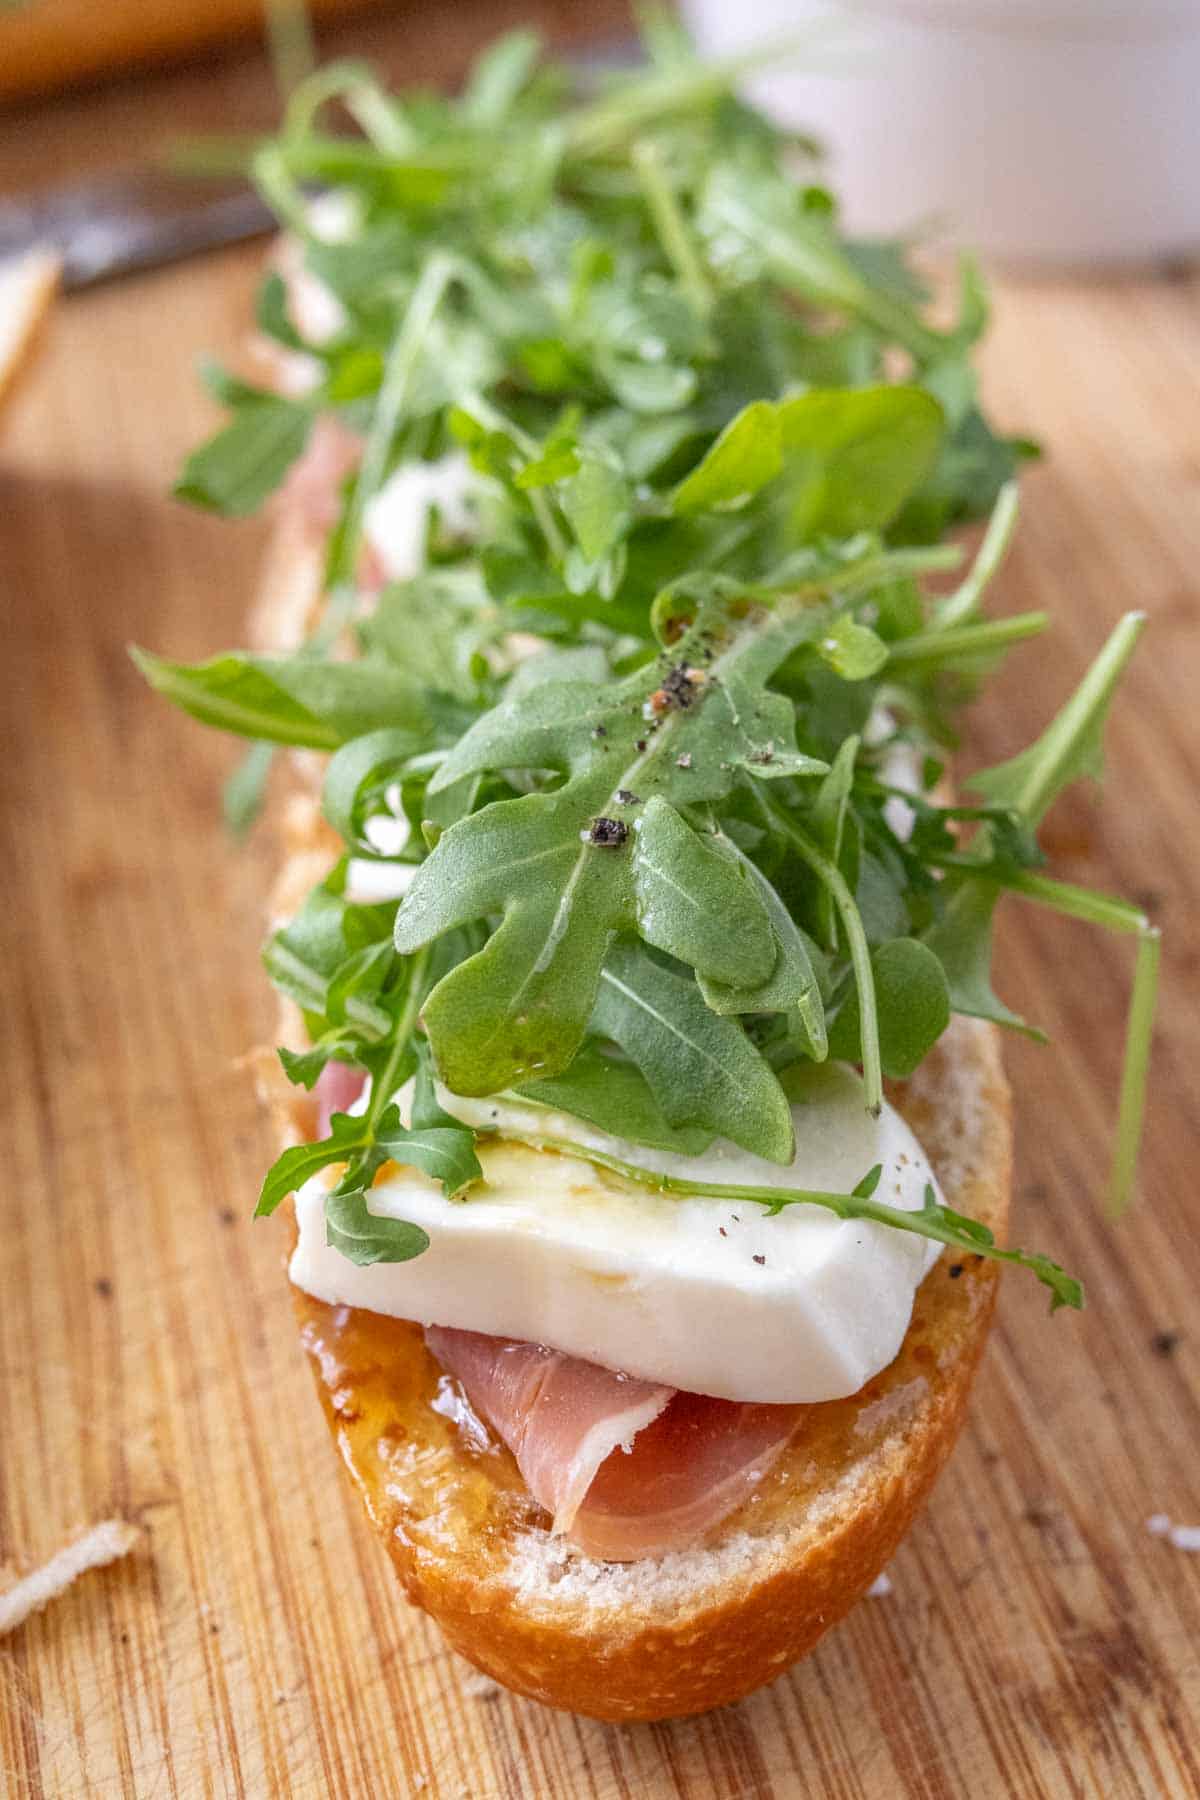 A sandwich with ham, cheese and arugula on a wooden cutting board.